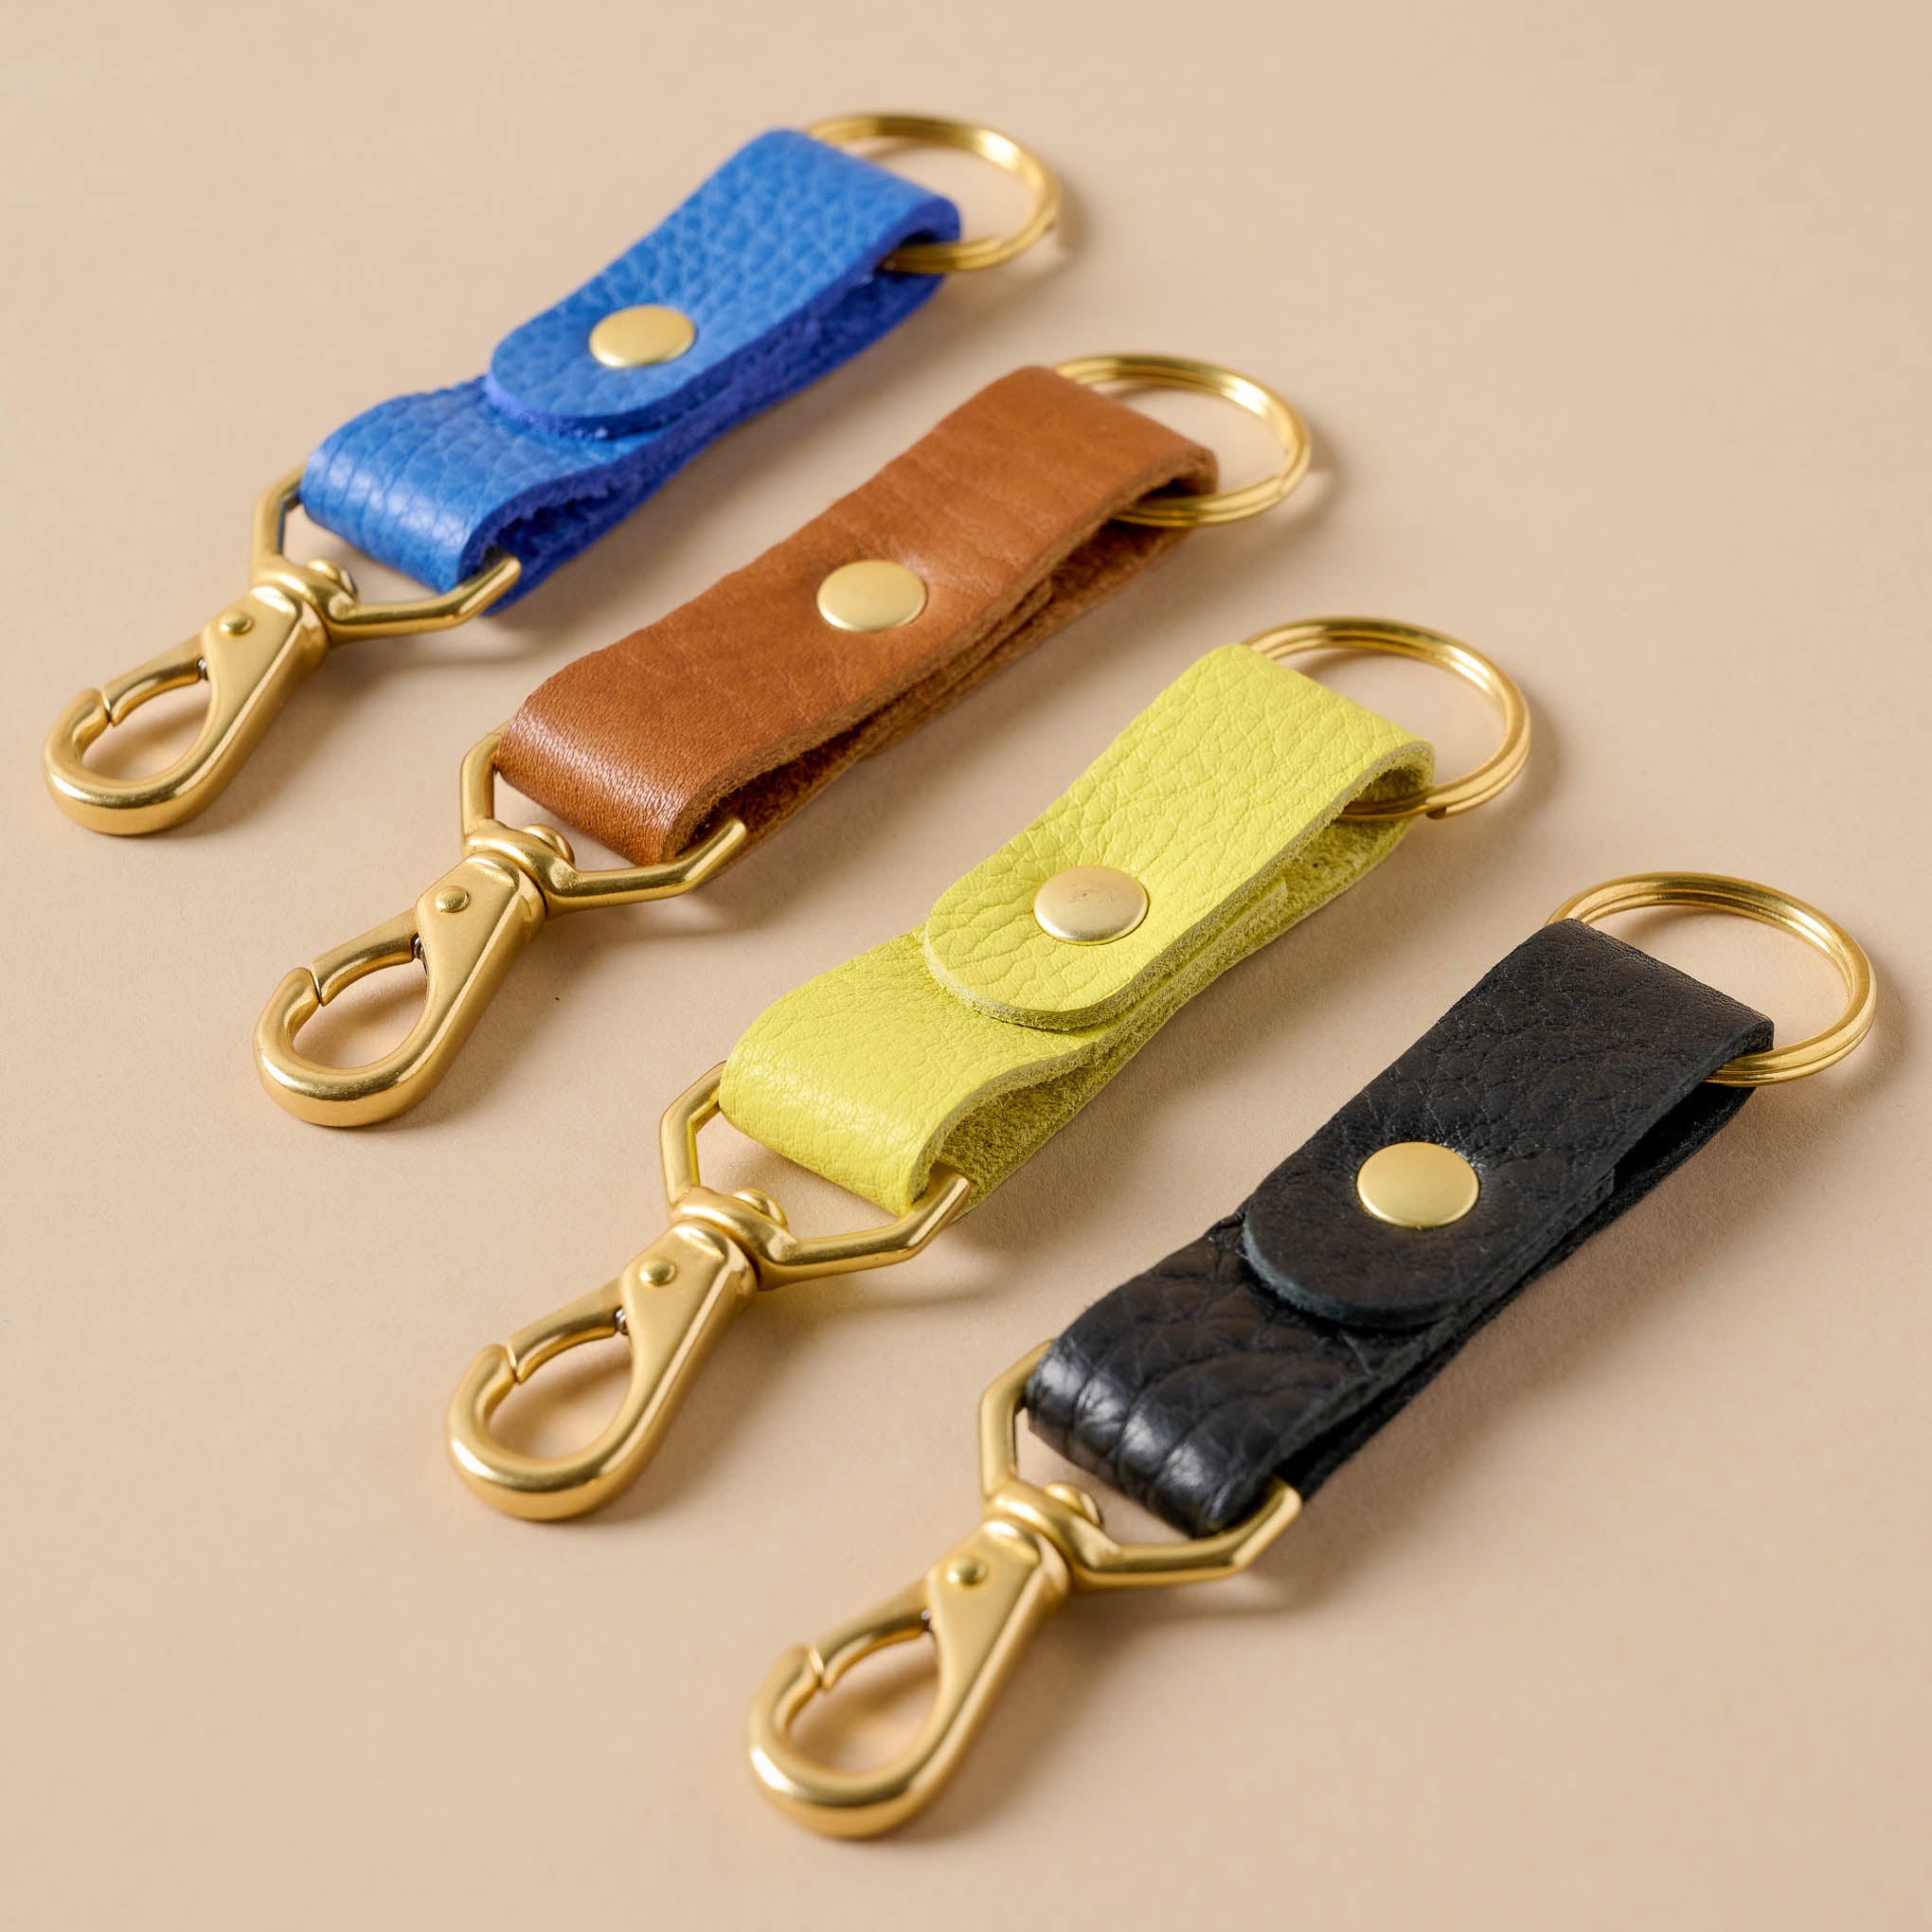 Luna Leather Keychain in blue, yellow, cognac, and black